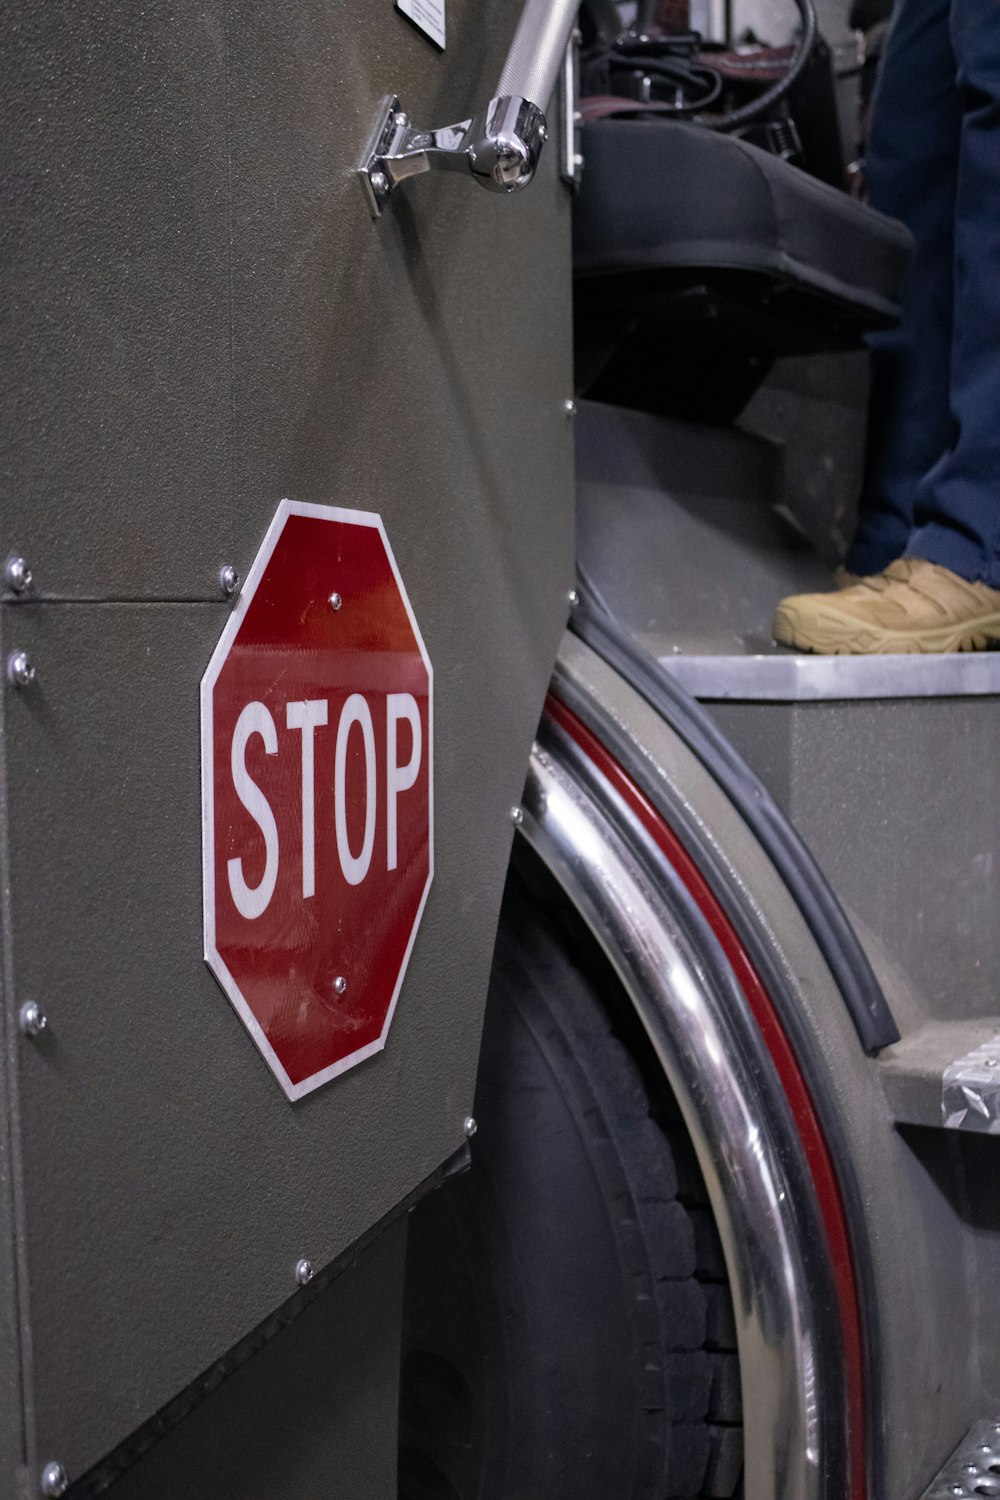 a stop sign on the side of a vehicle